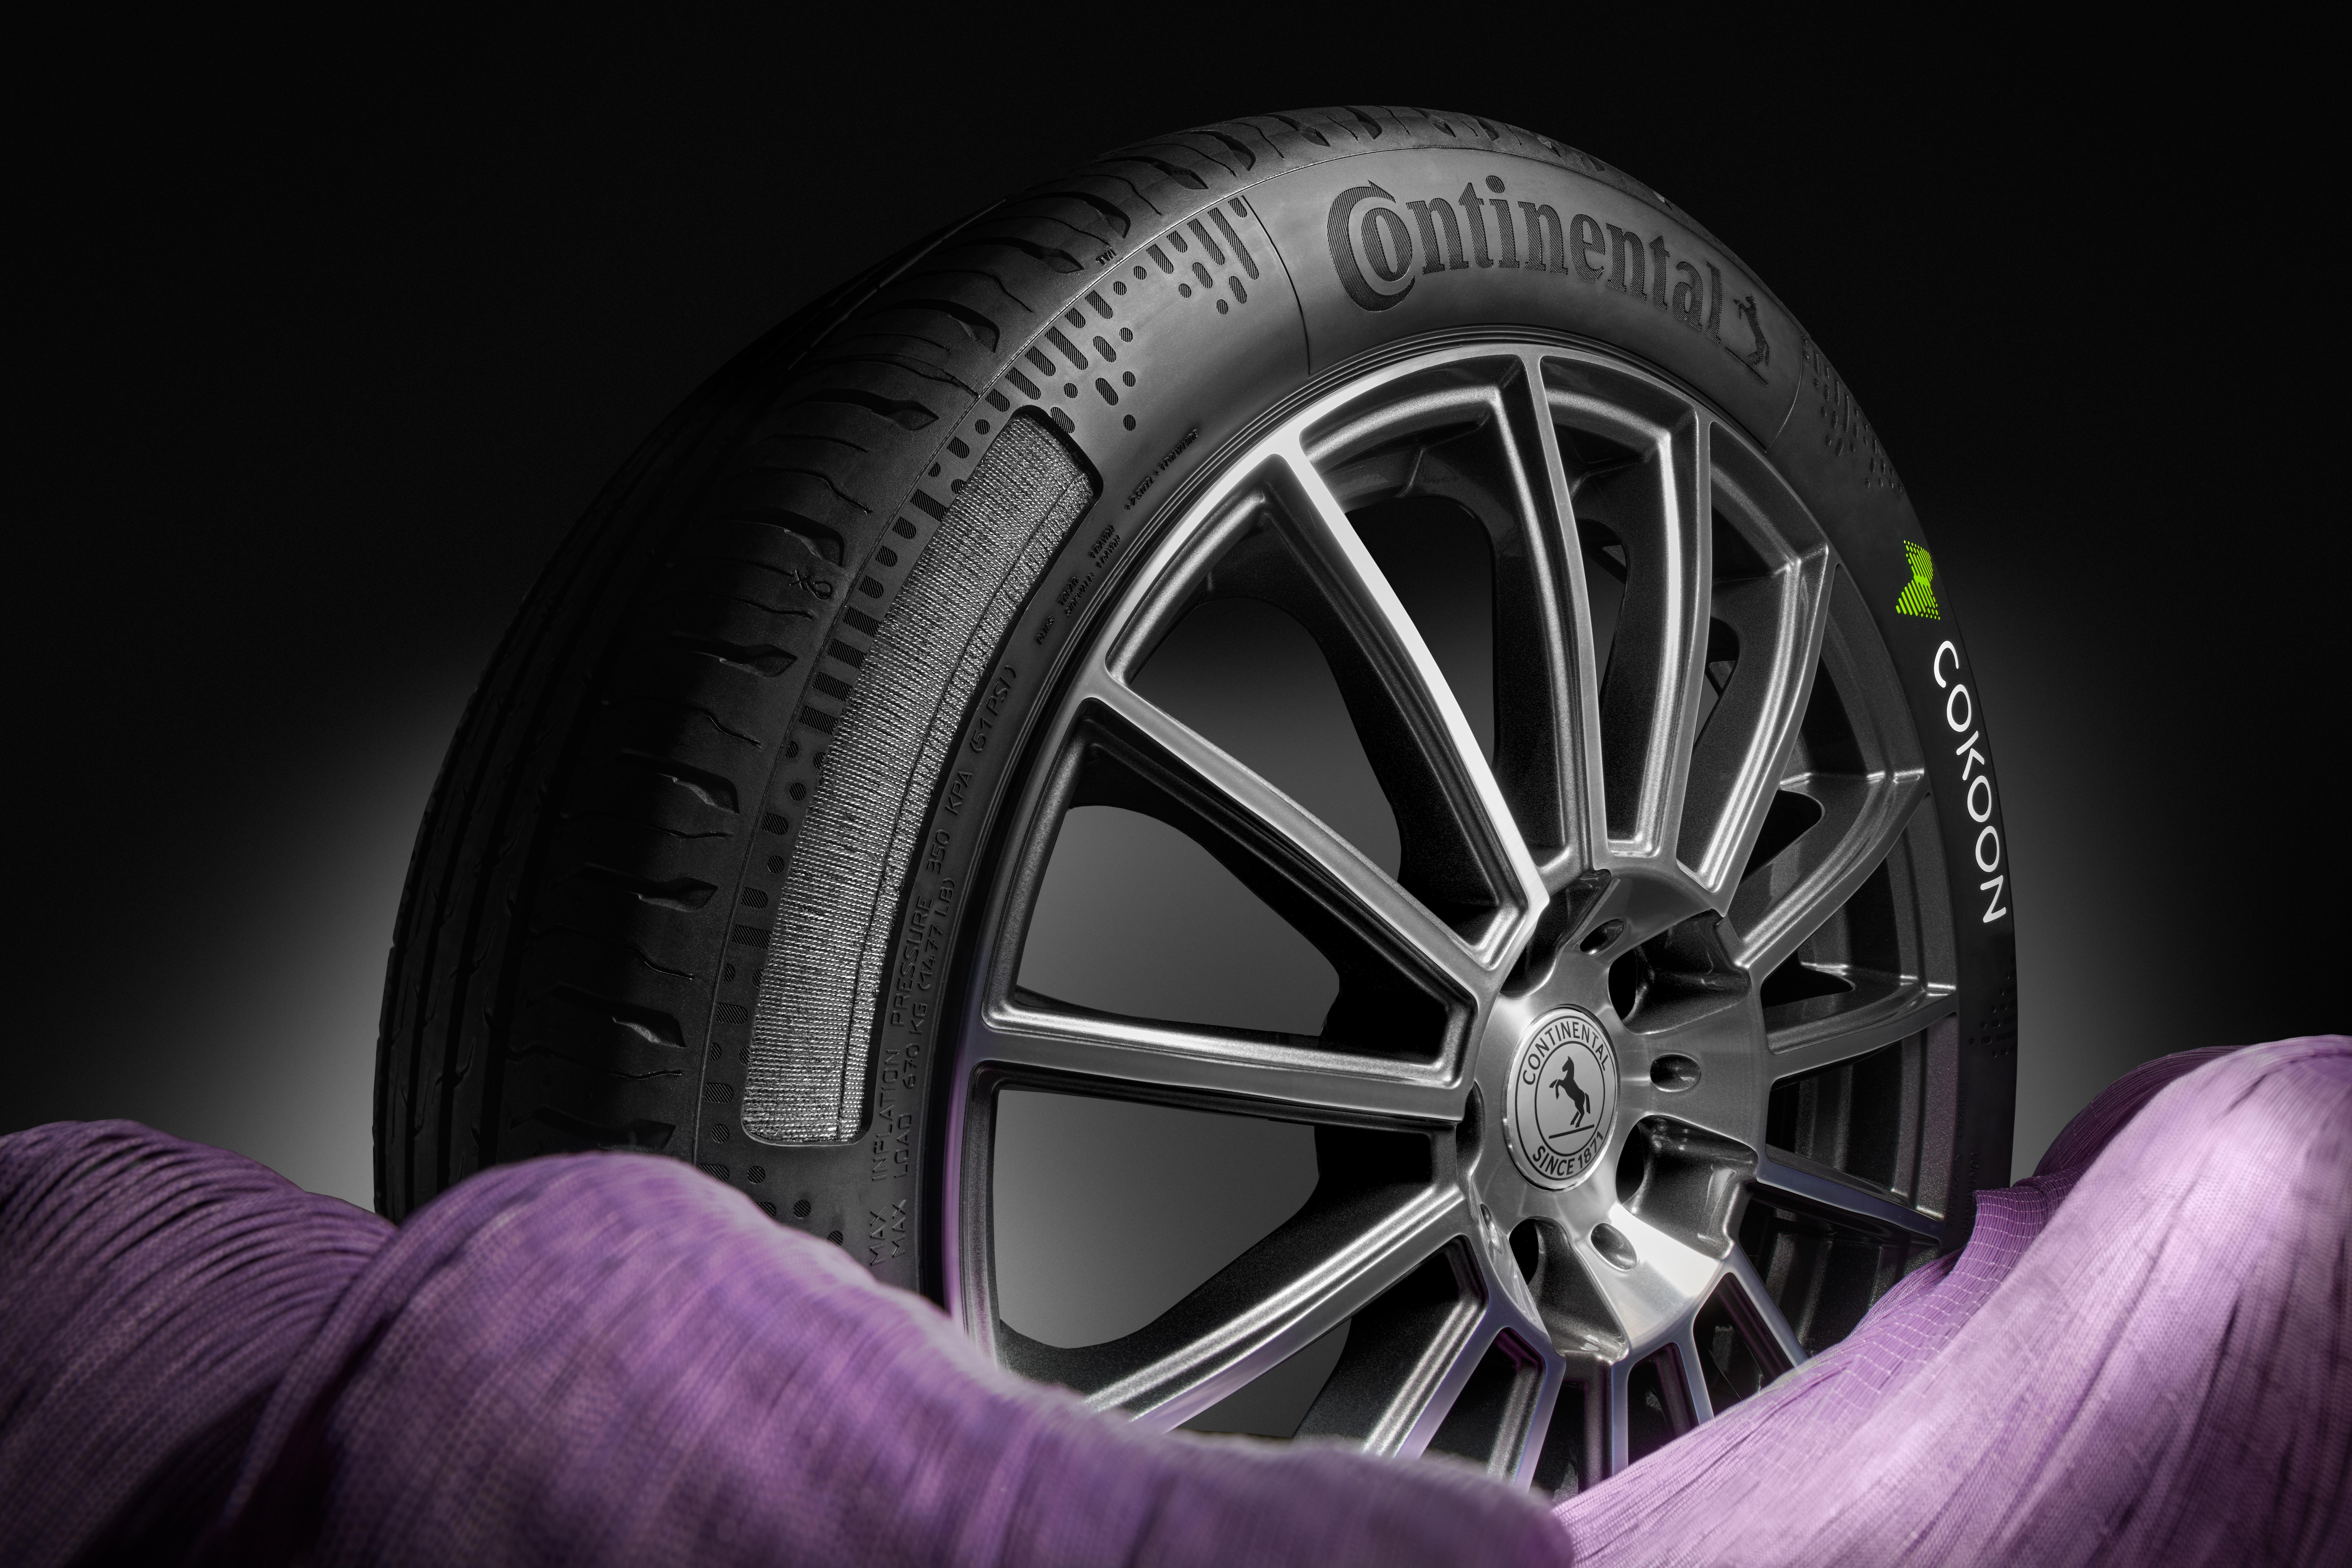 Continental and Kordsa bring onto with technology AG series - tires first Cokoon Continental the road dip